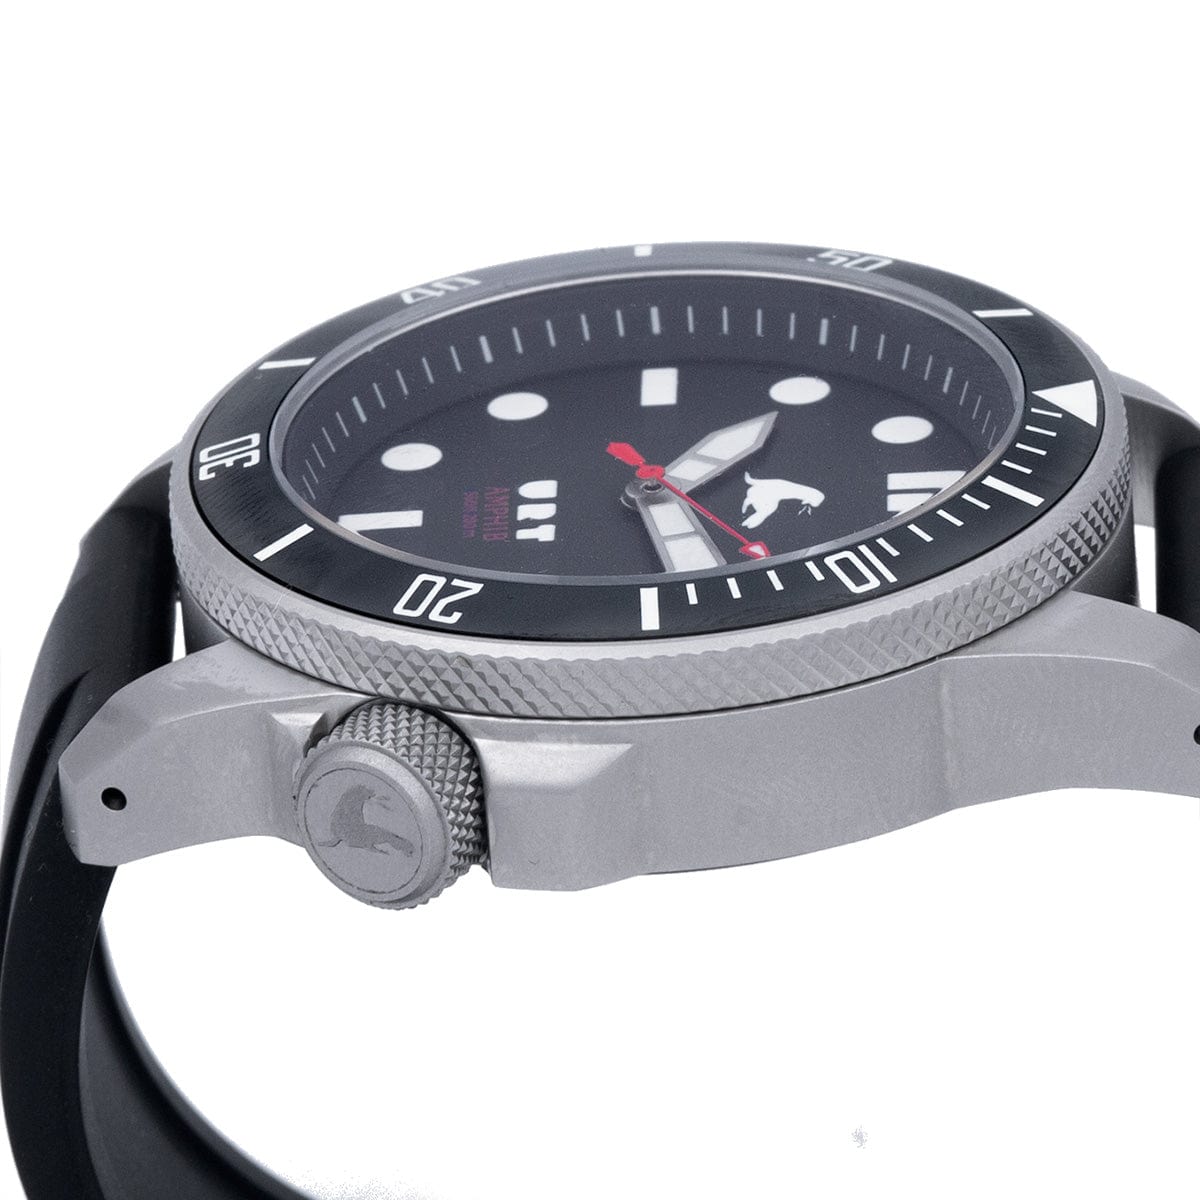 The Amphib Dive Watch // Stainless Steel